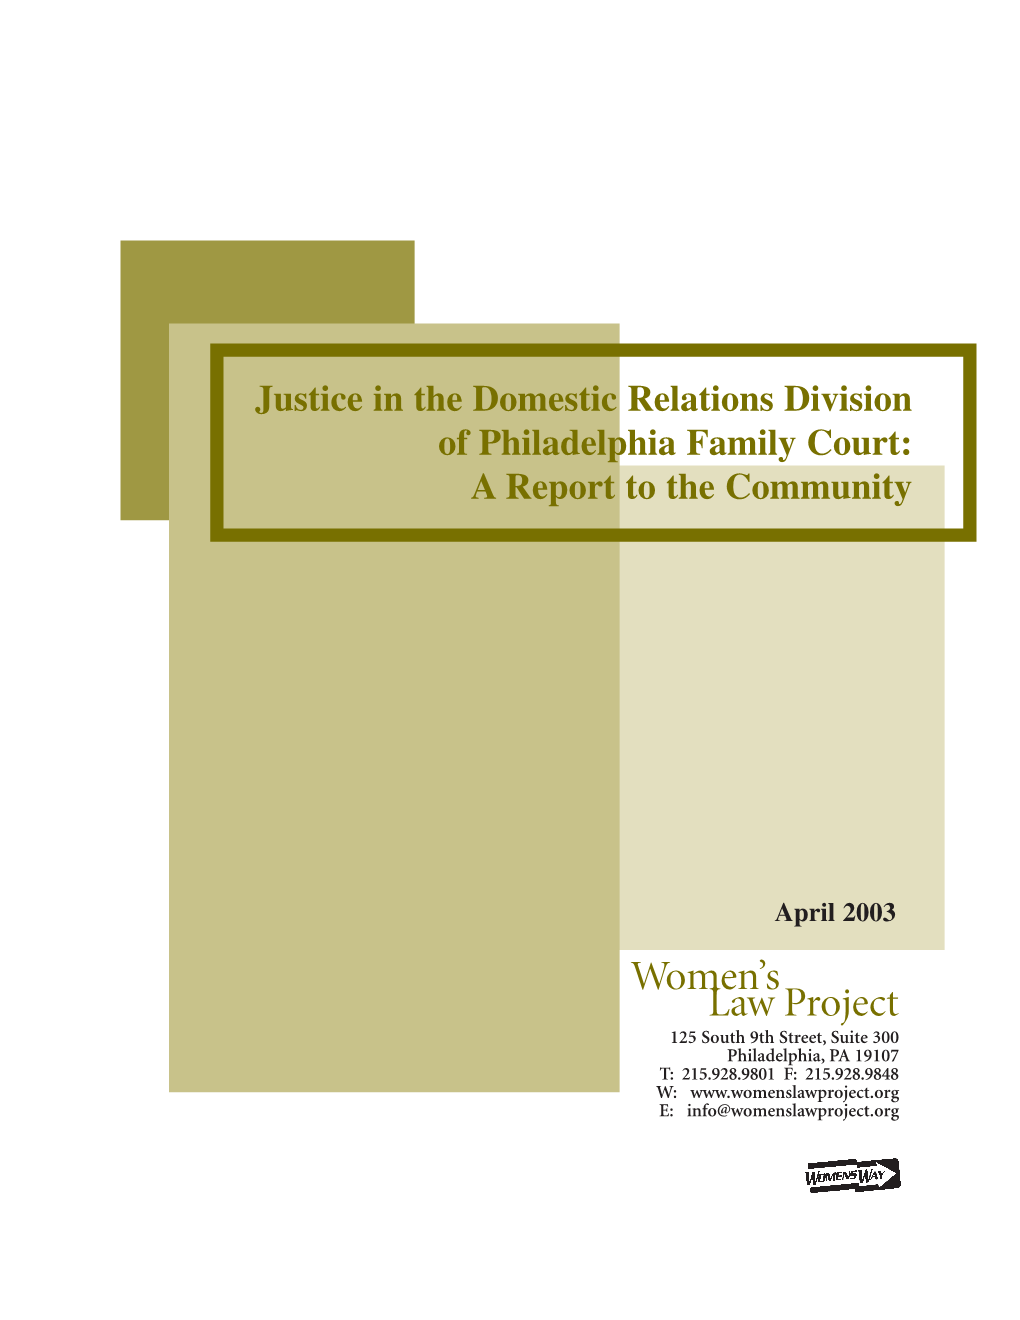 Justice in the Domestic Relations Division of Philadelphia Family Court: a Report to the Community